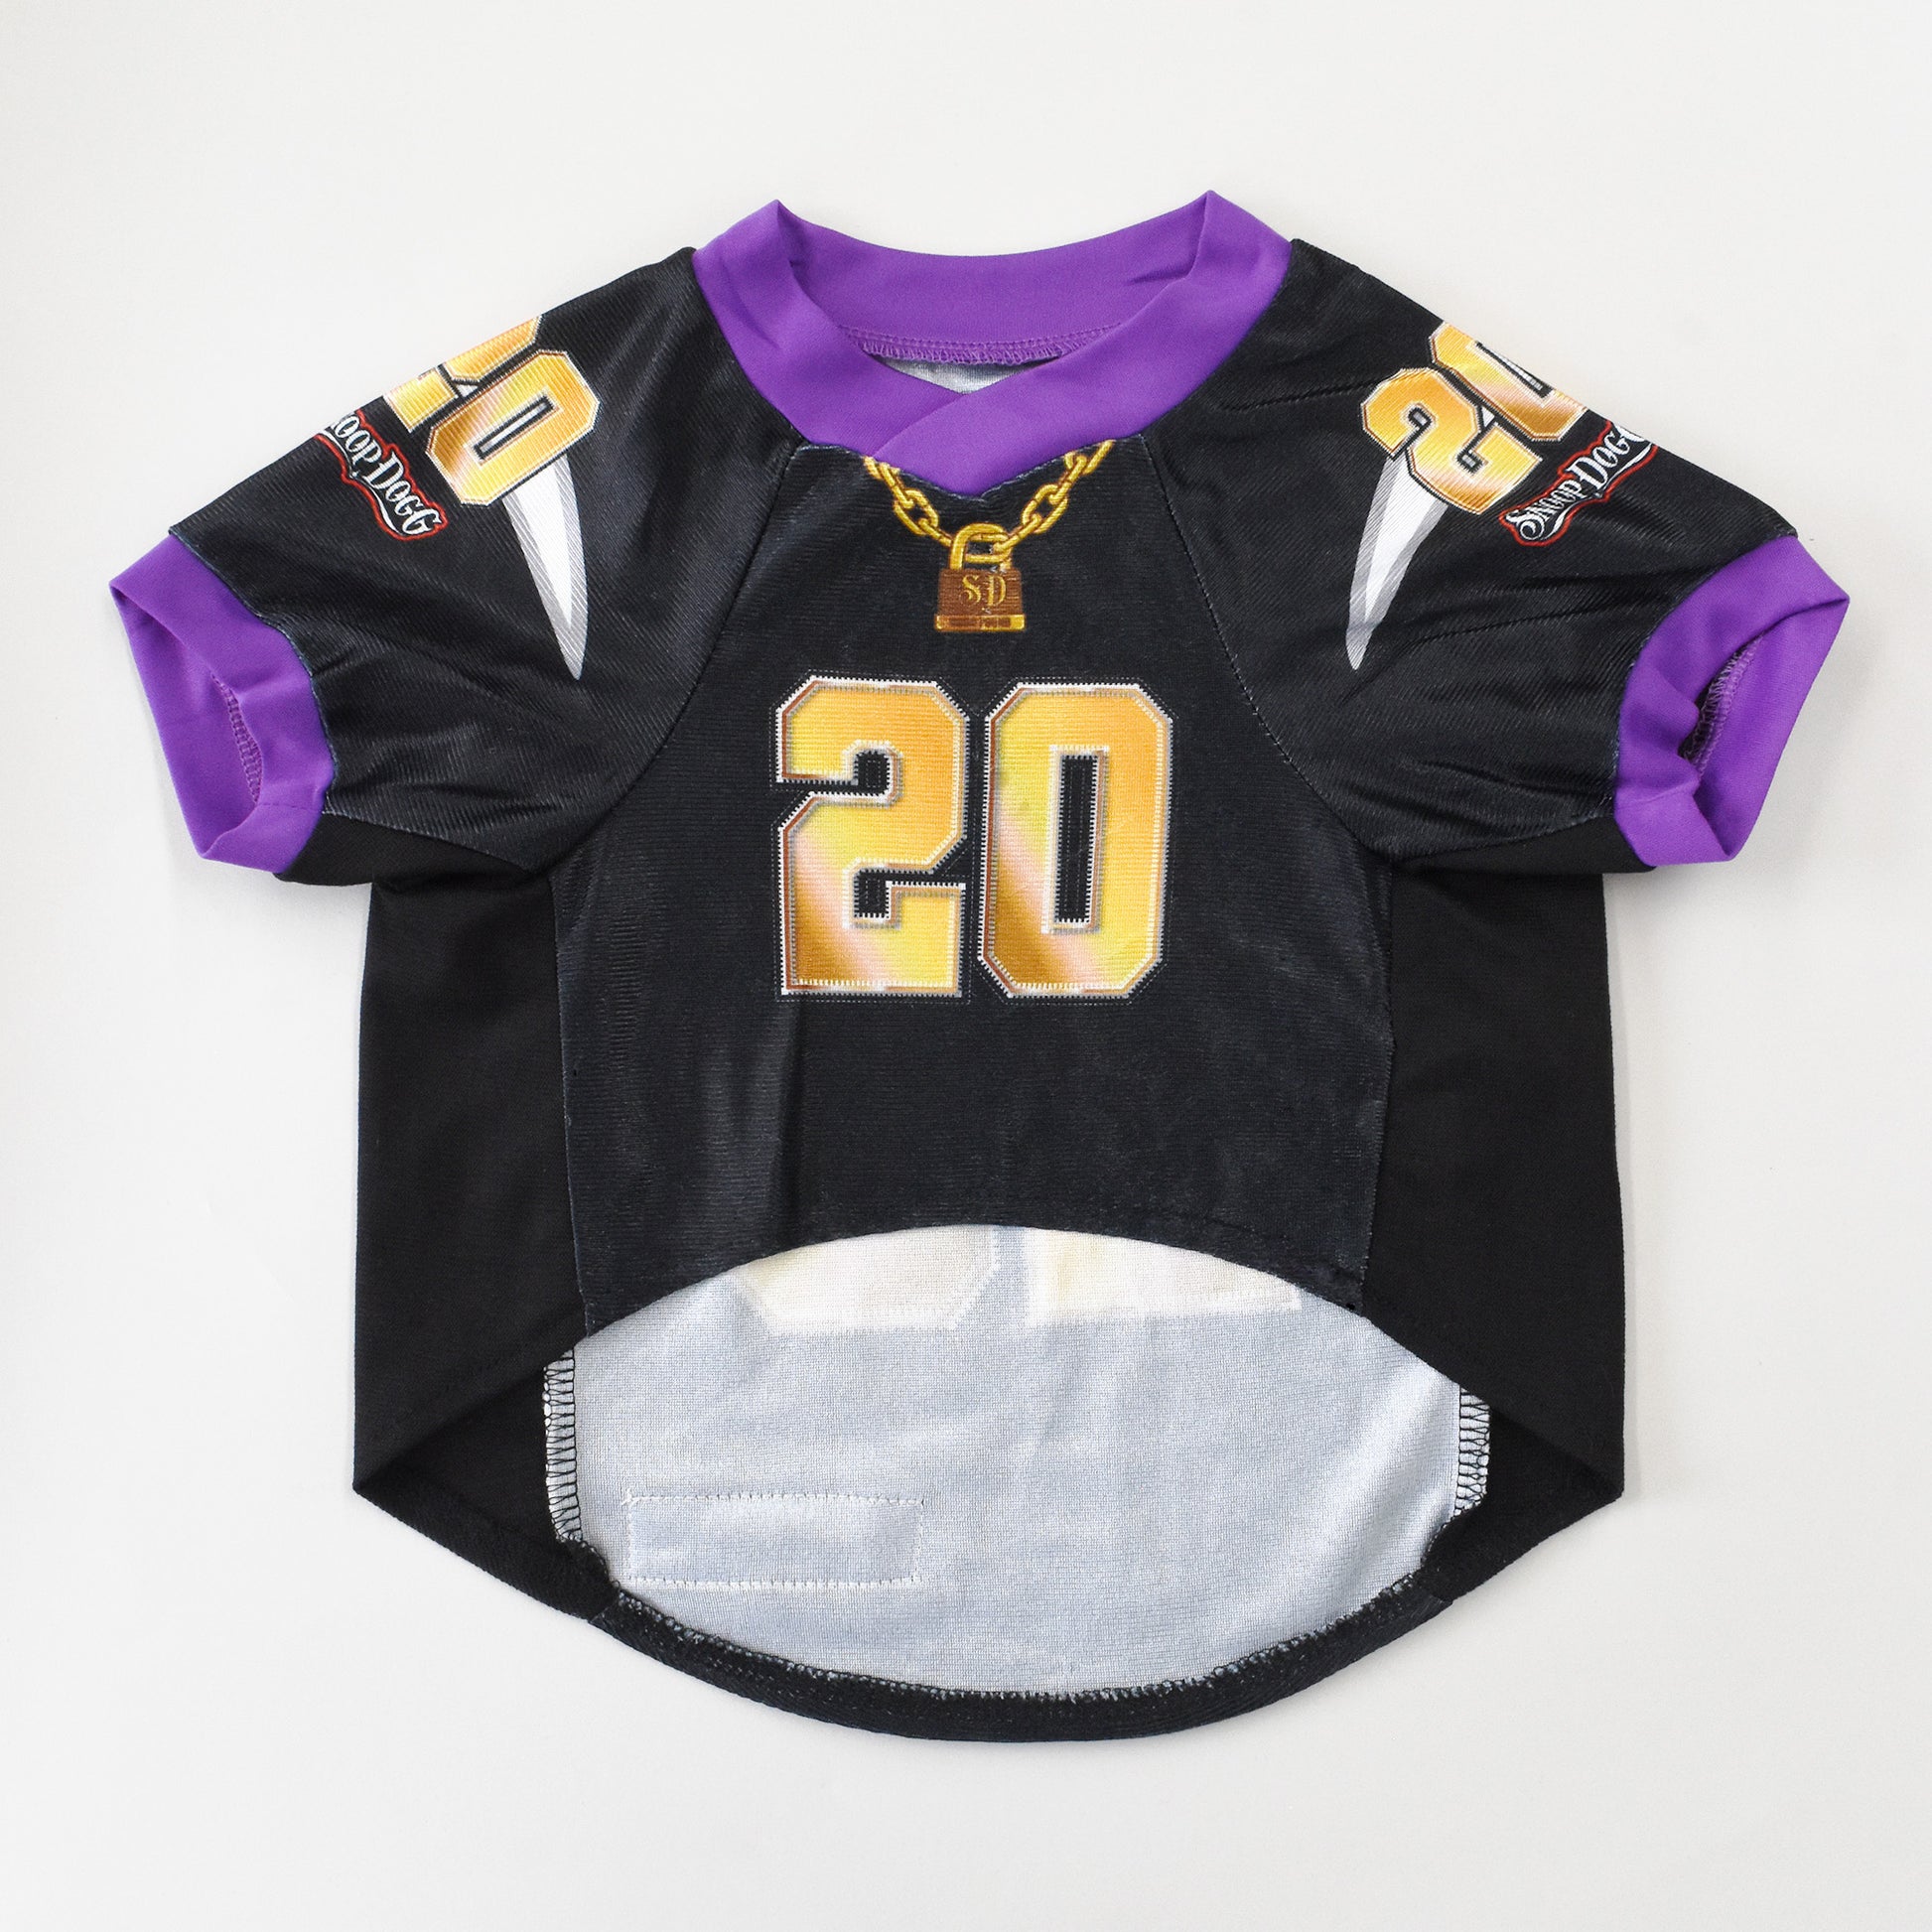 Product flat lay of the Off The Chain Deluxe Pet Jersey.